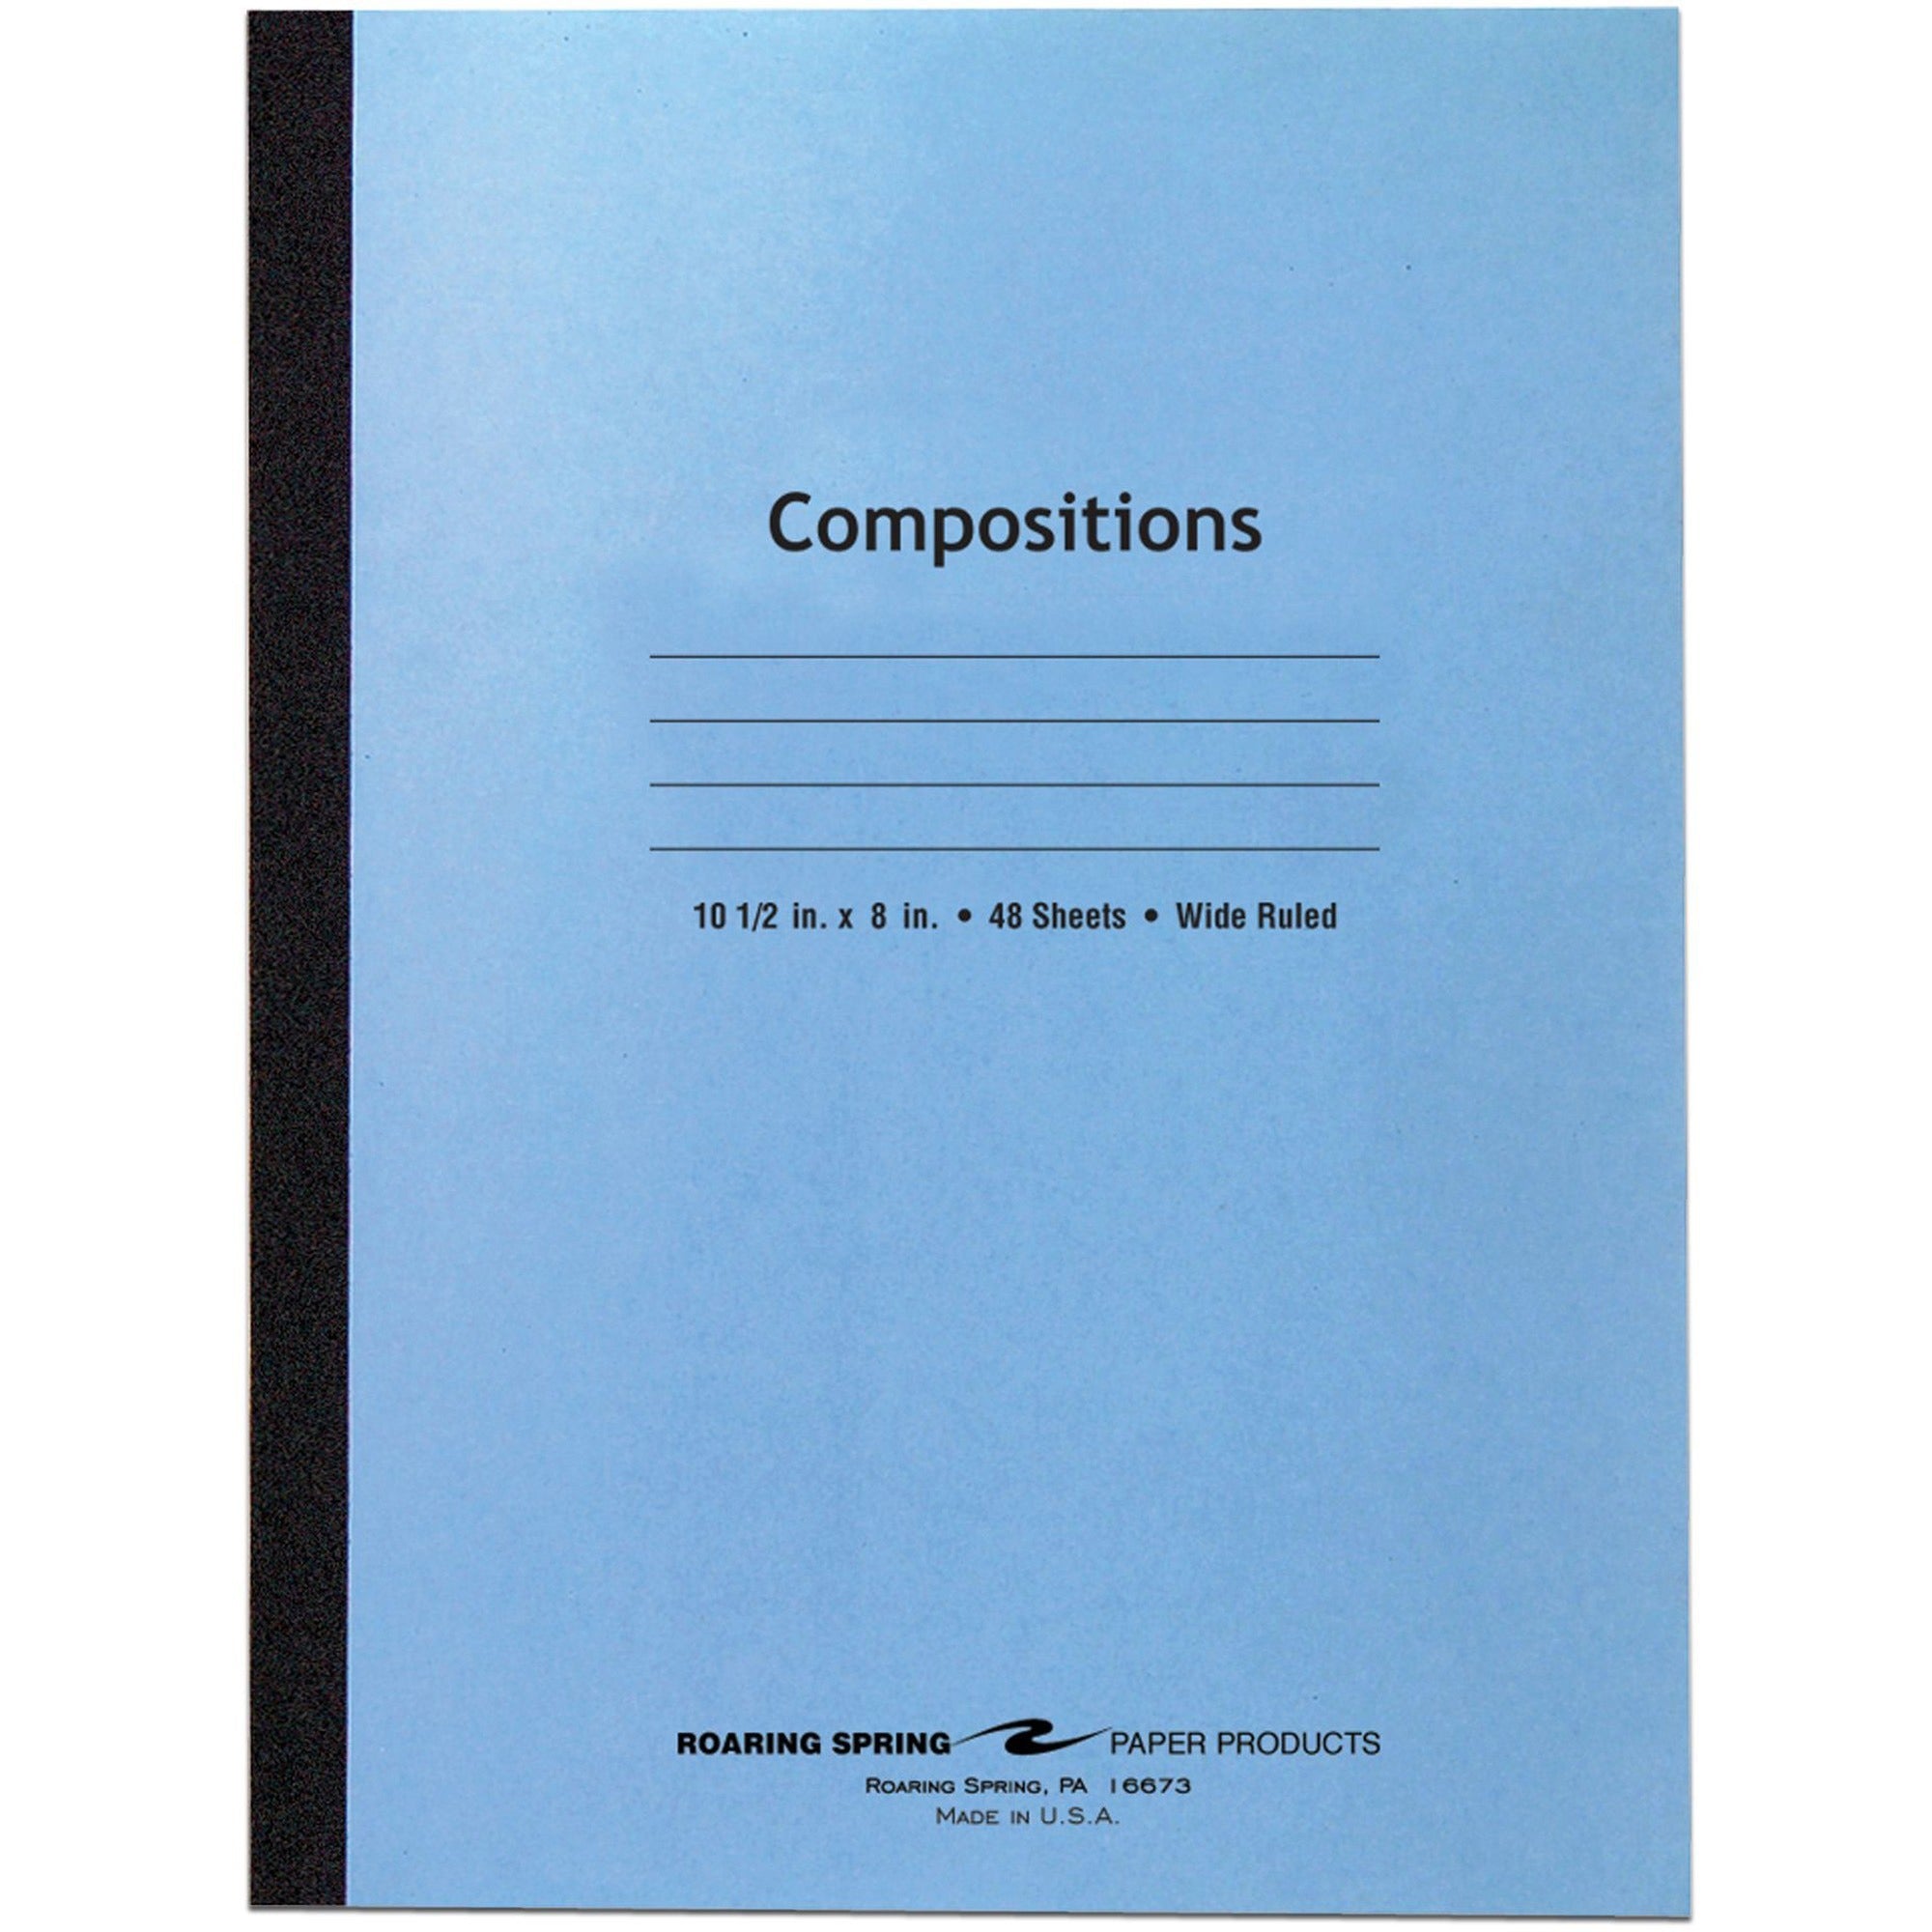 Roaring Spring Wide Ruled Flexible Cover Composition Book - 48 Sheets - 96 Pages - Printed - Sewn/Tapebound - Both Side Ruling Surface - Red Margin - 15 lb Basis Weight - 56 g/m2 Grammage - 10 1/2" x 8" - 0.25" x 8" x 10.5" - White Paper - Black - 